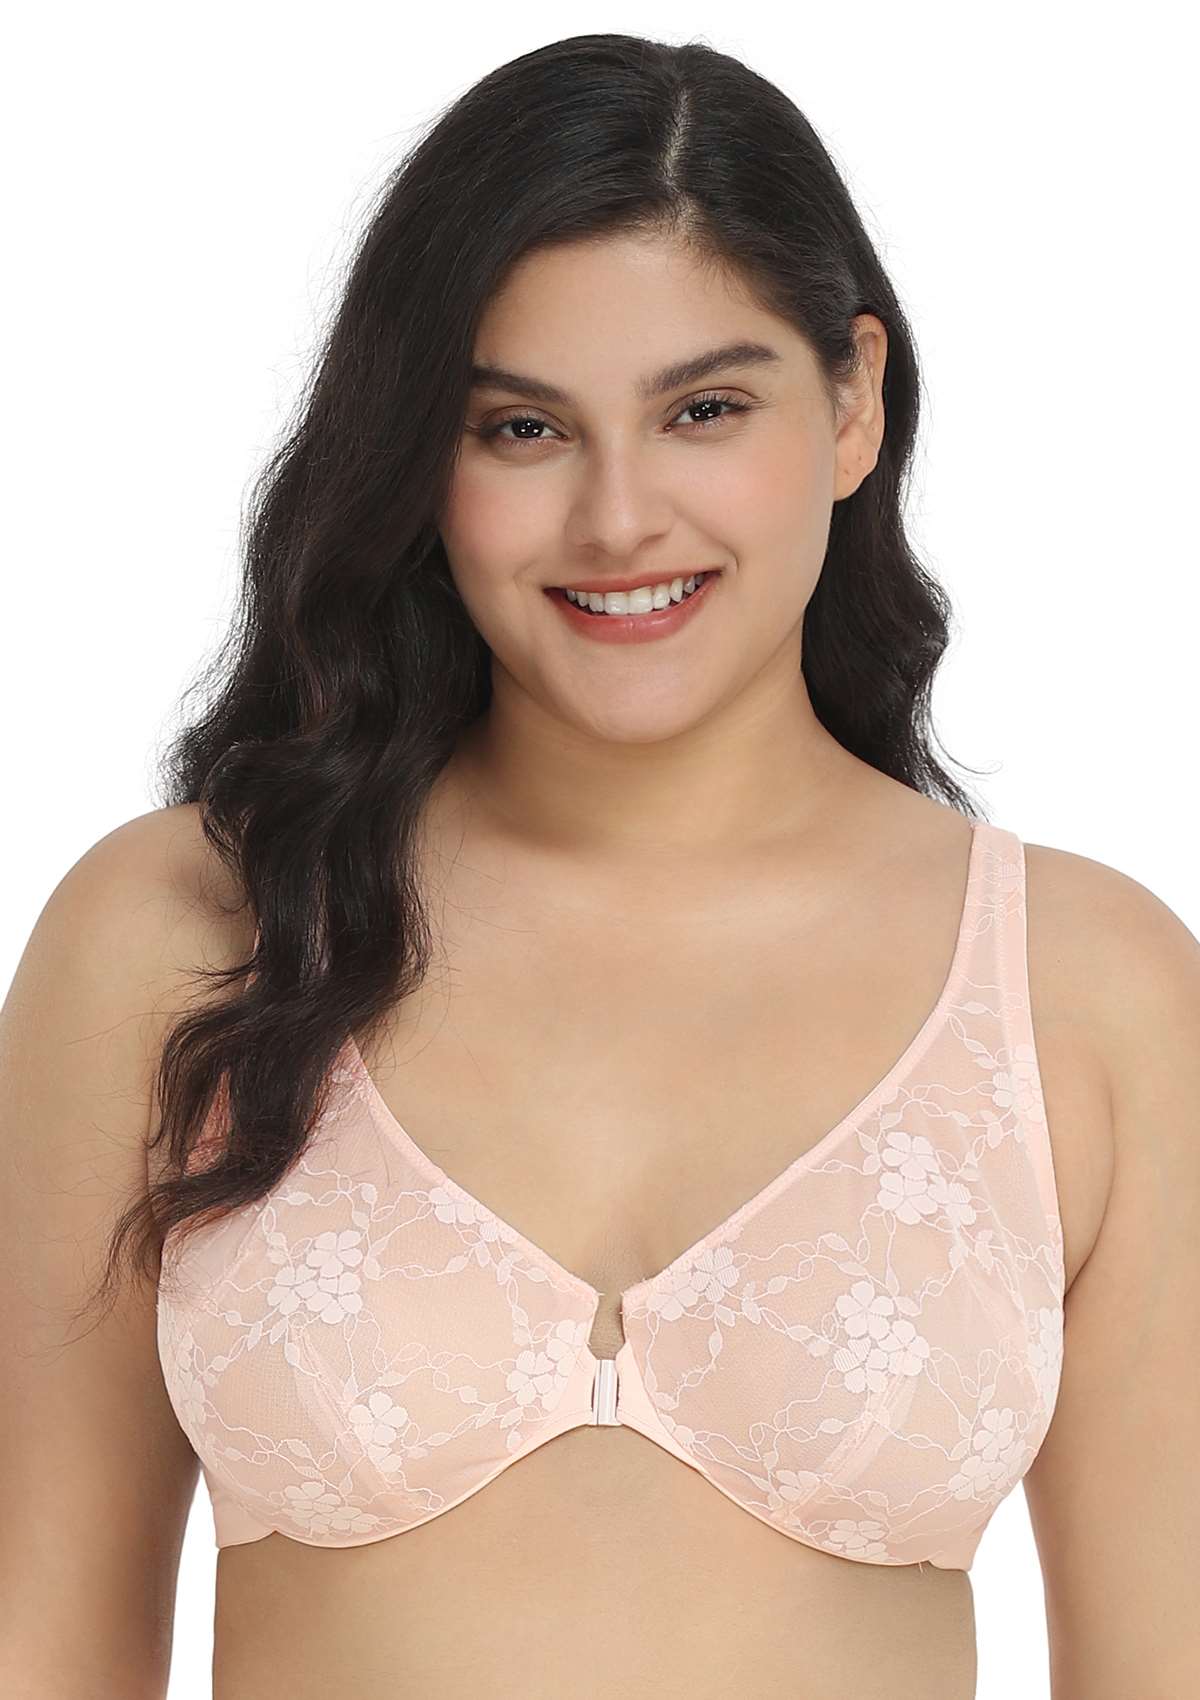 HSIA Spring Romance Front-Close Floral Lace Unlined Full Coverage Bra - White / 40 / G